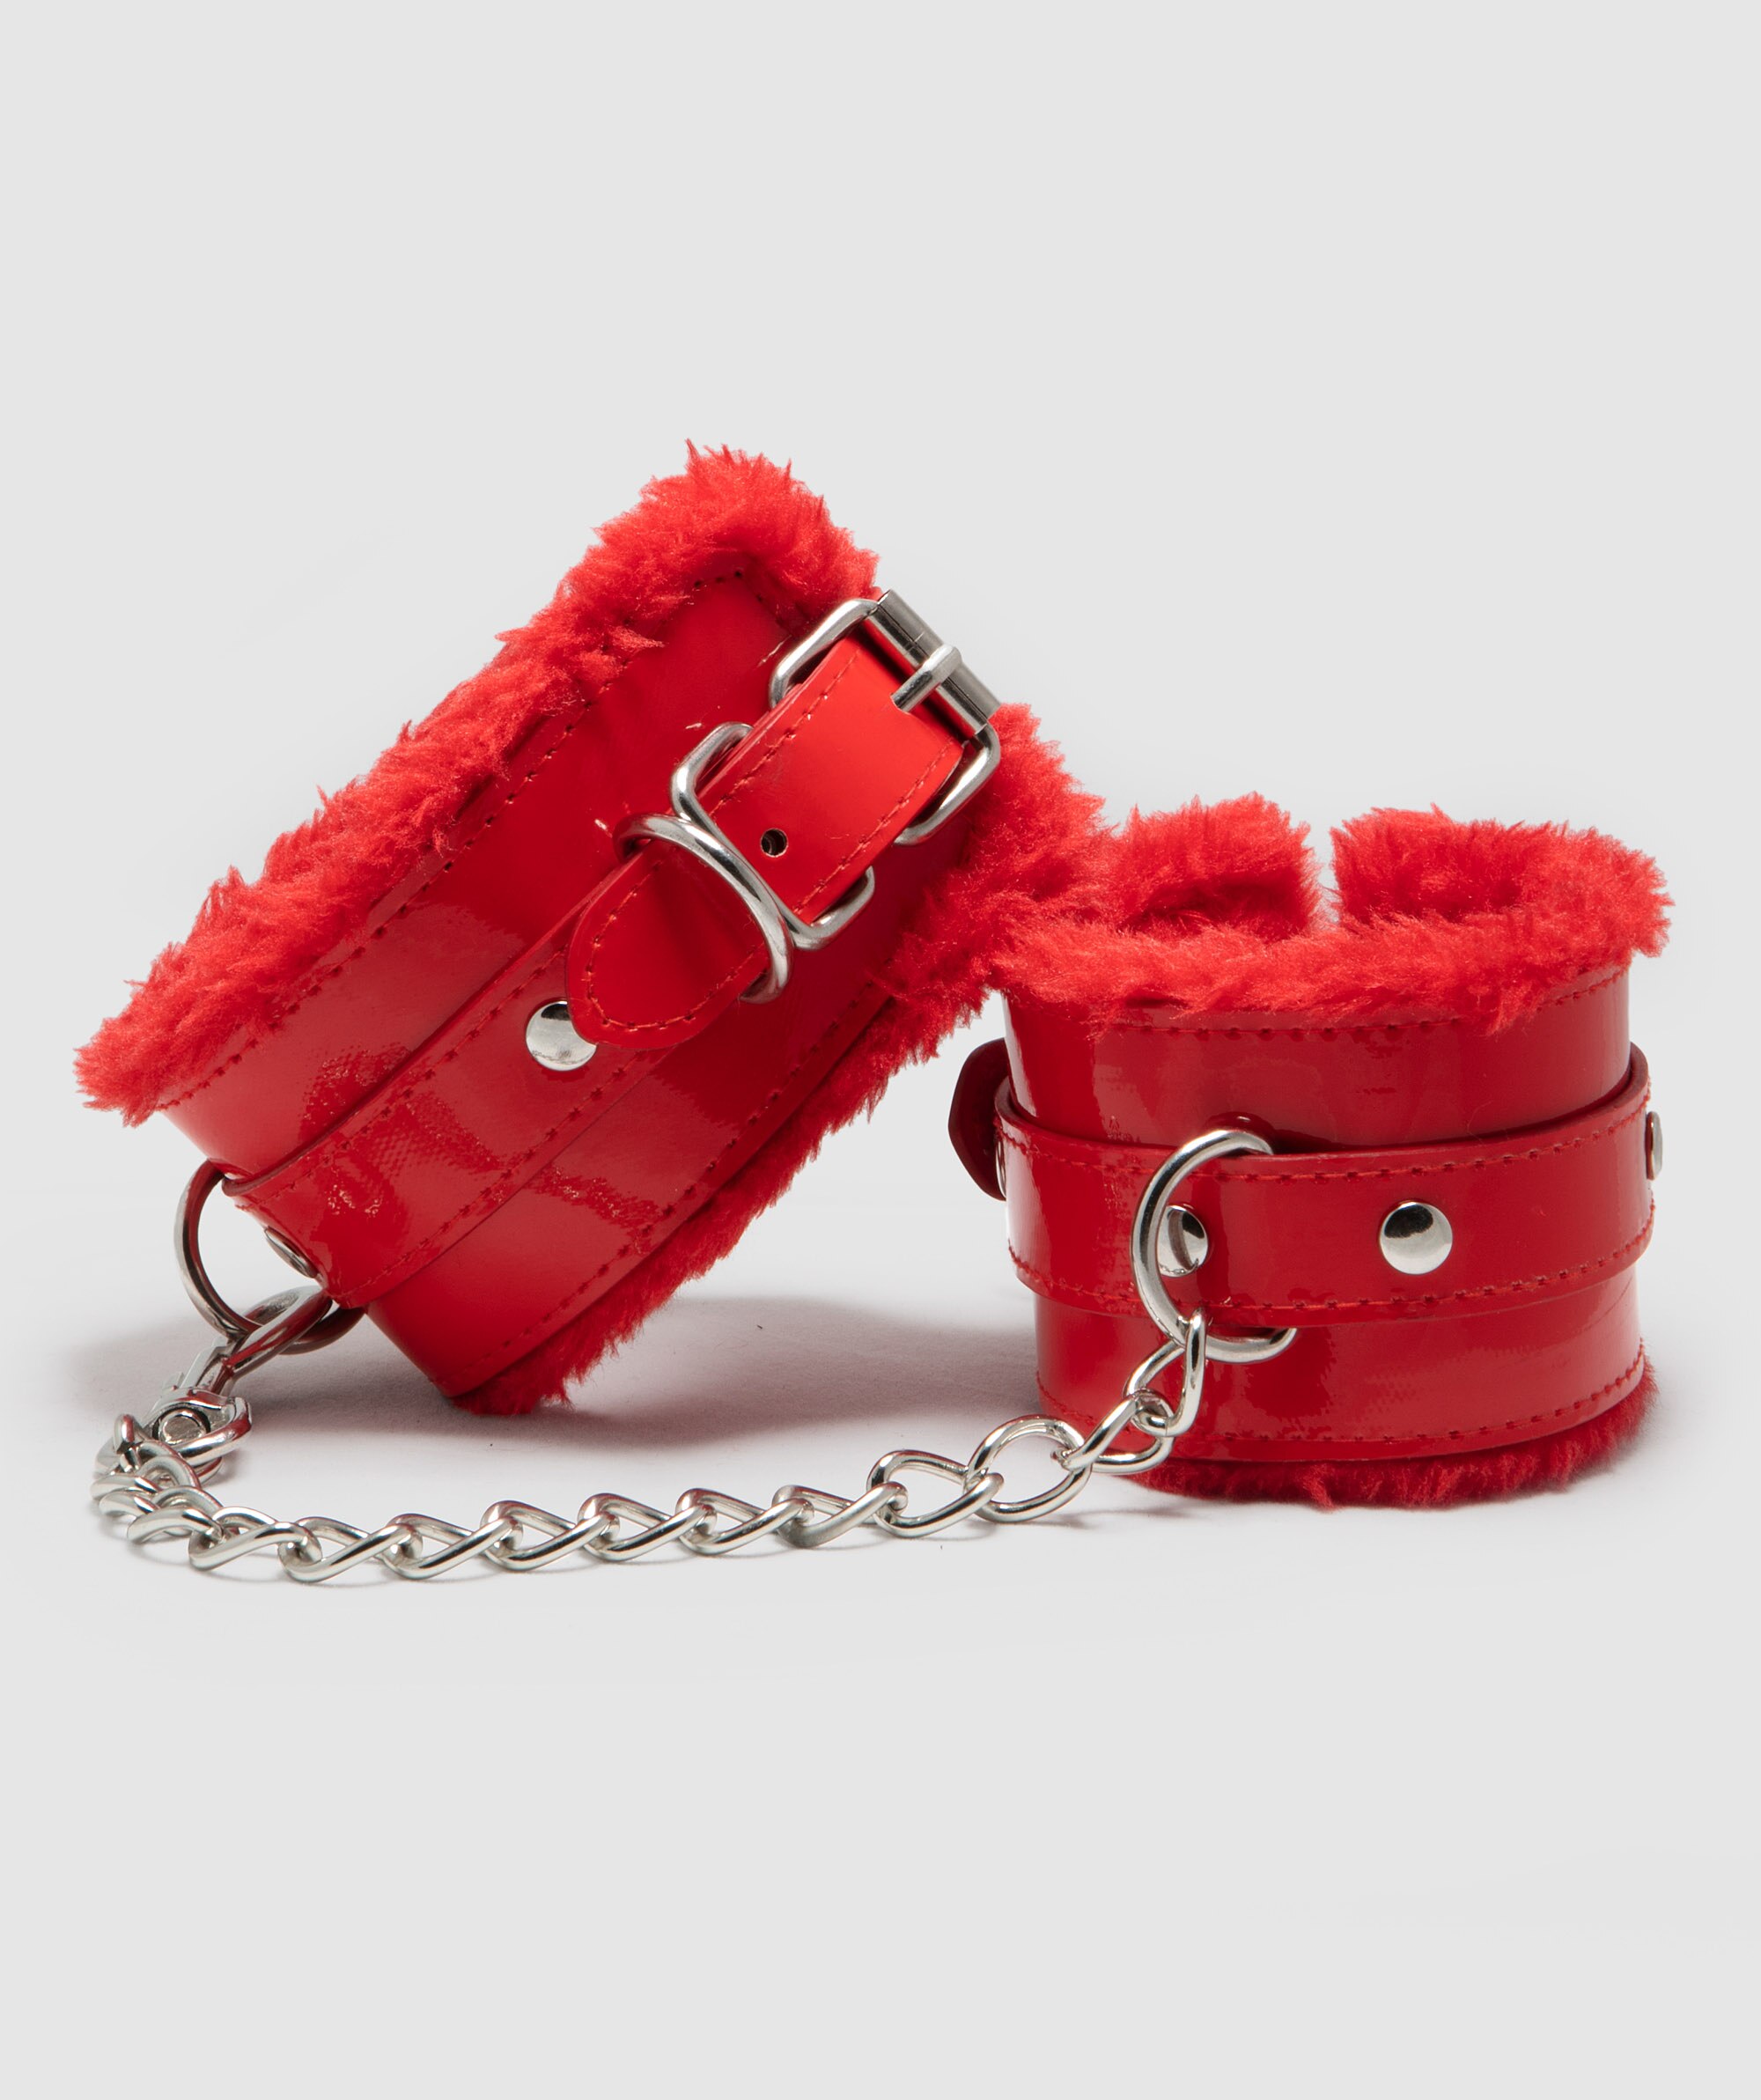 Night Games Domme Handcuffs - Red